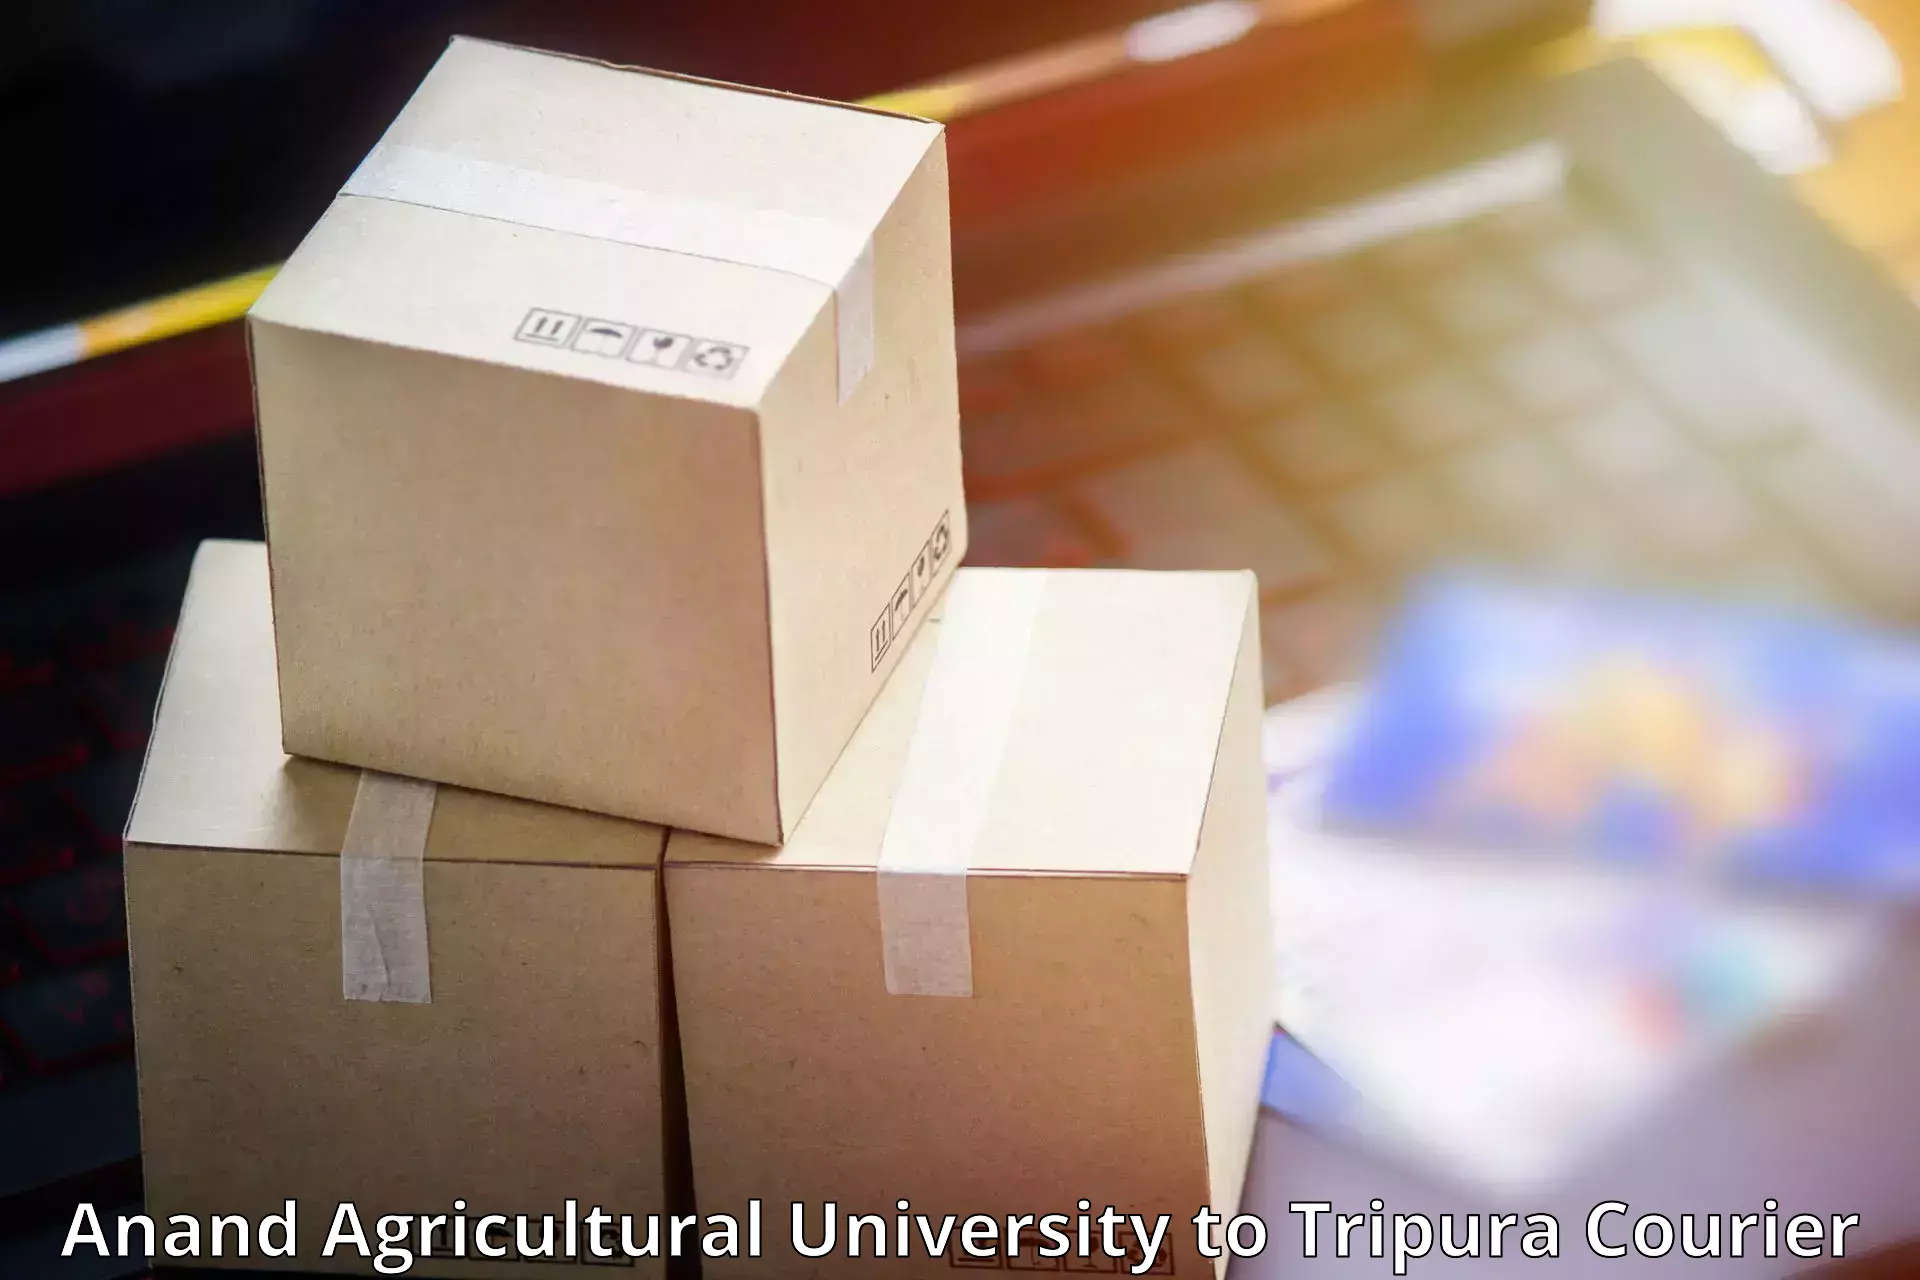 Ground shipping Anand Agricultural University to Kailashahar